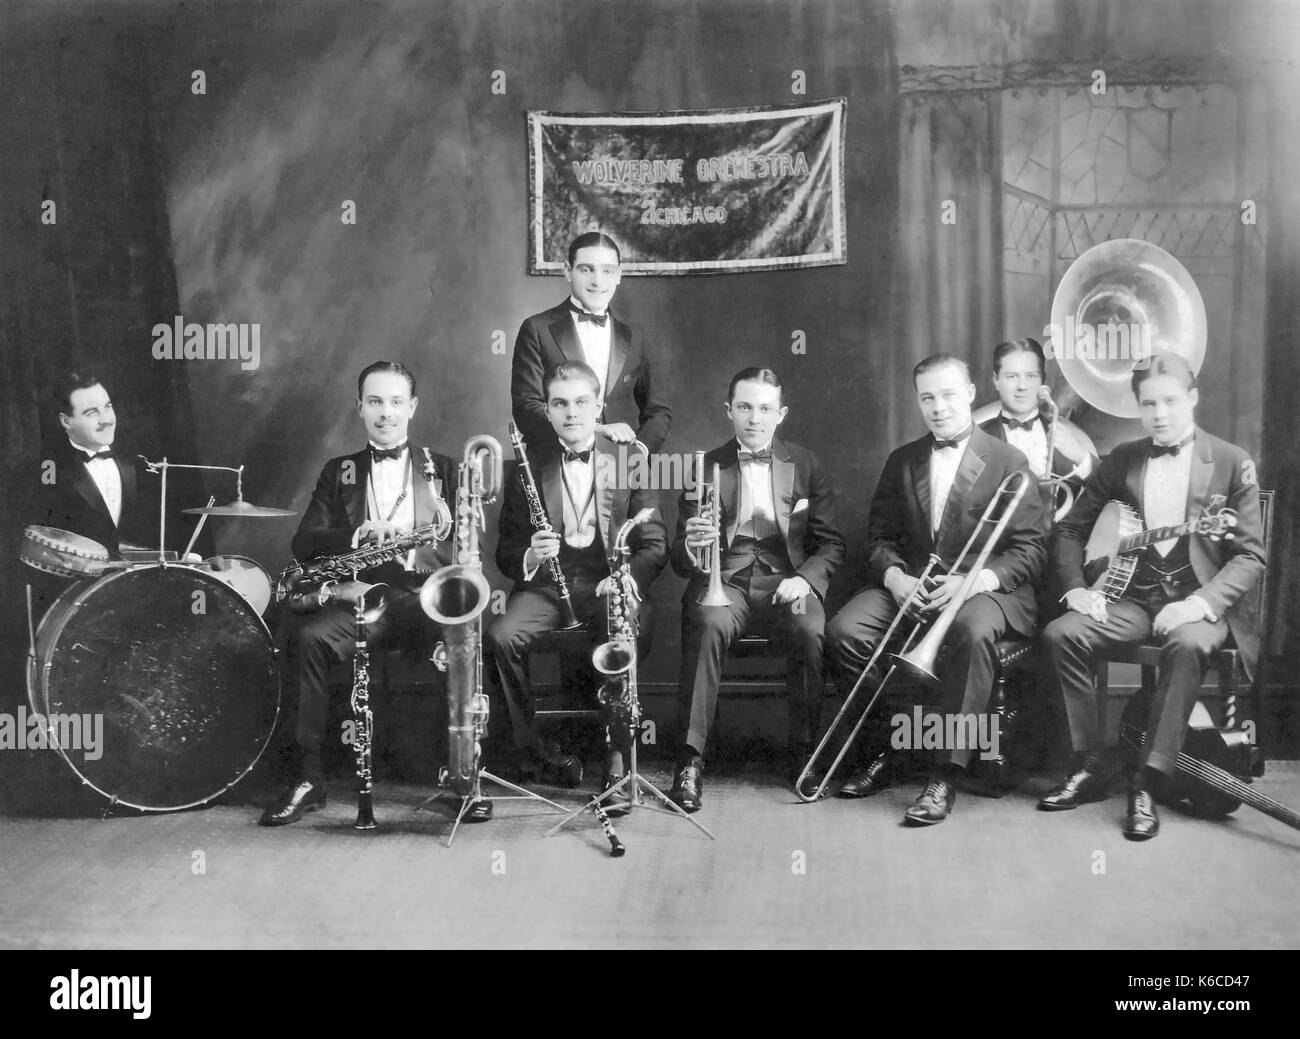 THE WOLVERINE ORCHESTRA American jazz band at Doyle's Academy of Music in Cincinnati, Ohio, in 1924.  Bix Beiderbeck is fourth from right Stock Photo